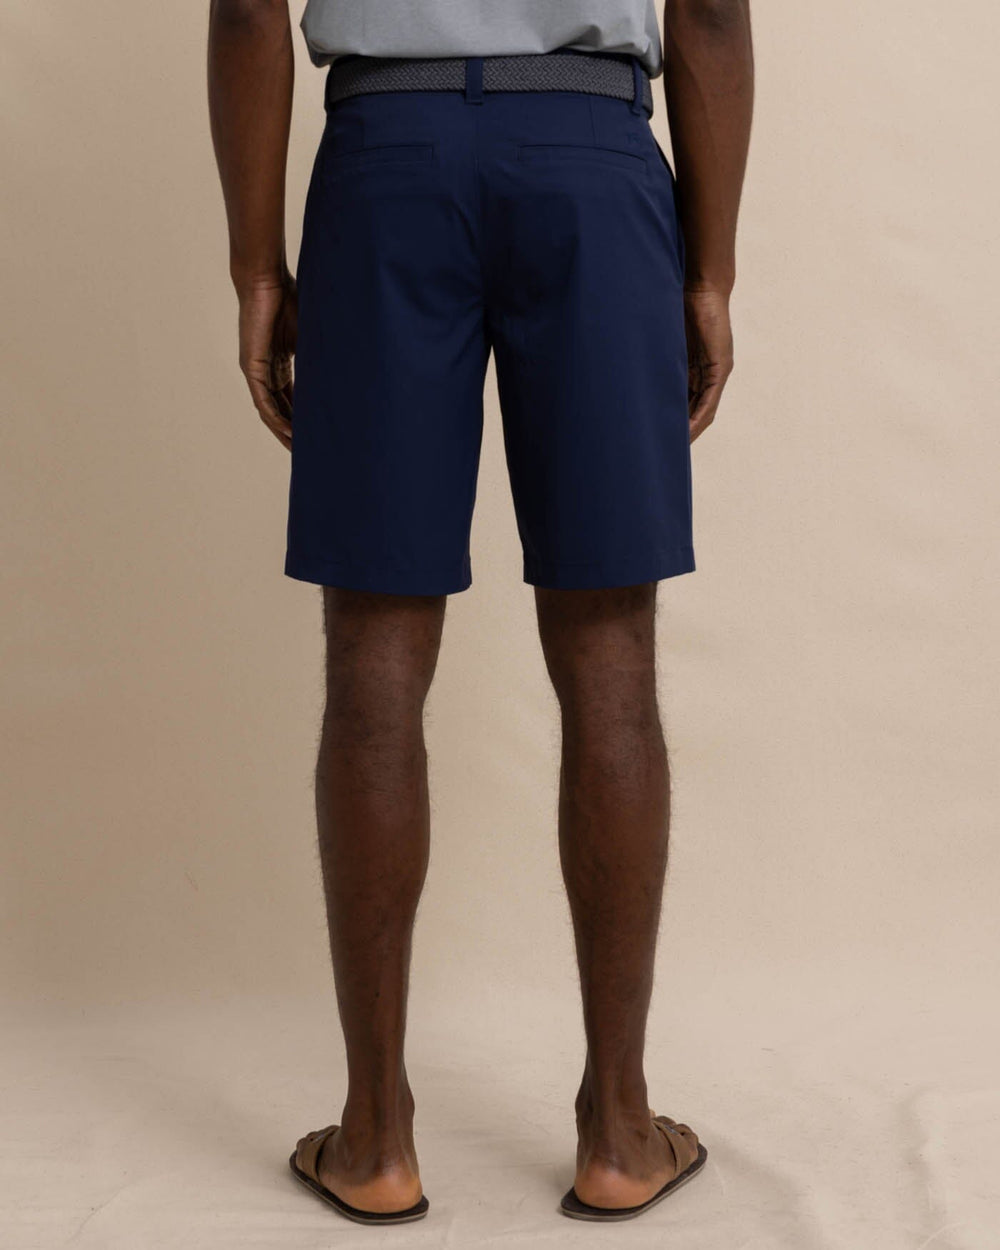 The back view of the Southern Tide brrr die 10 Short by Southern Tide - True Navy